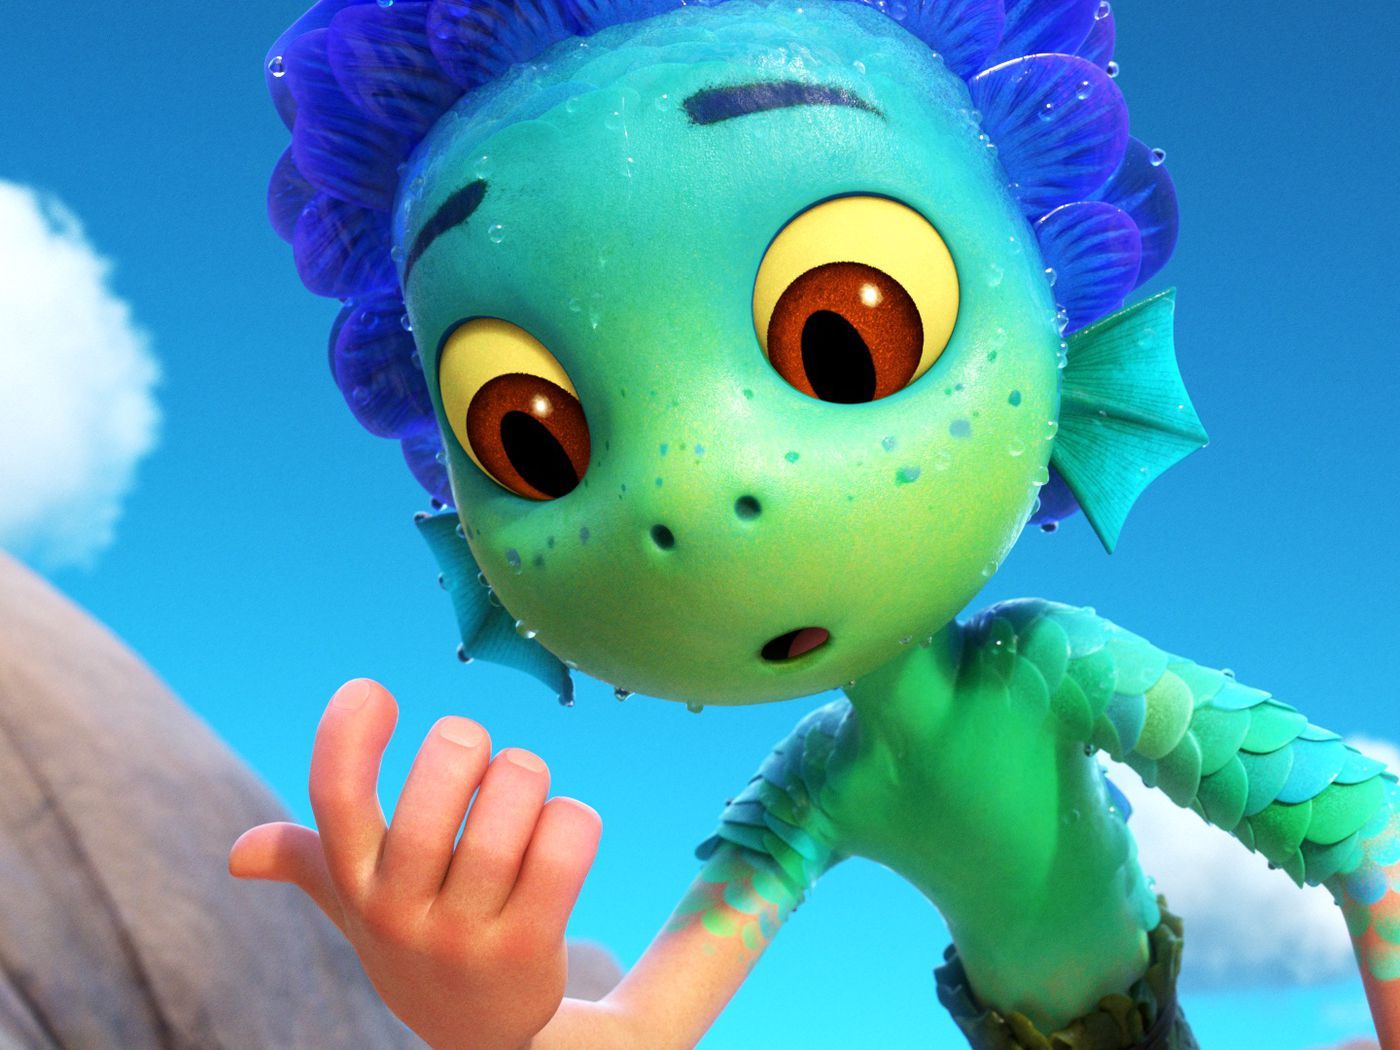 How Pixar created Luca's adorable, transforming sea monsters